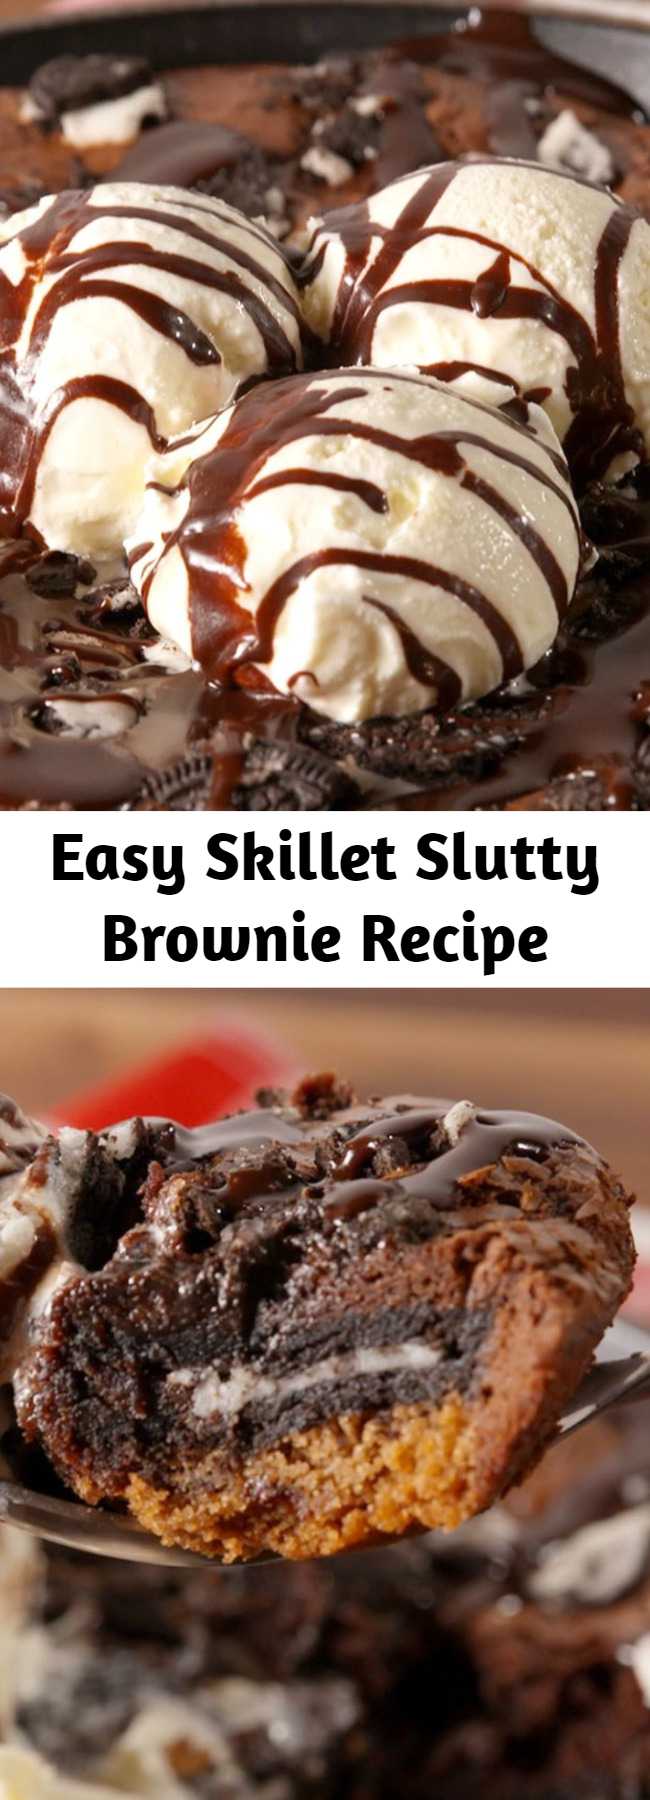 Easy Skillet Slutty Brownie Recipe - Give your dessert game a major upgrade with this easy recipe for a skillet slutty brownie. This is the ultimate girls' night dessert.